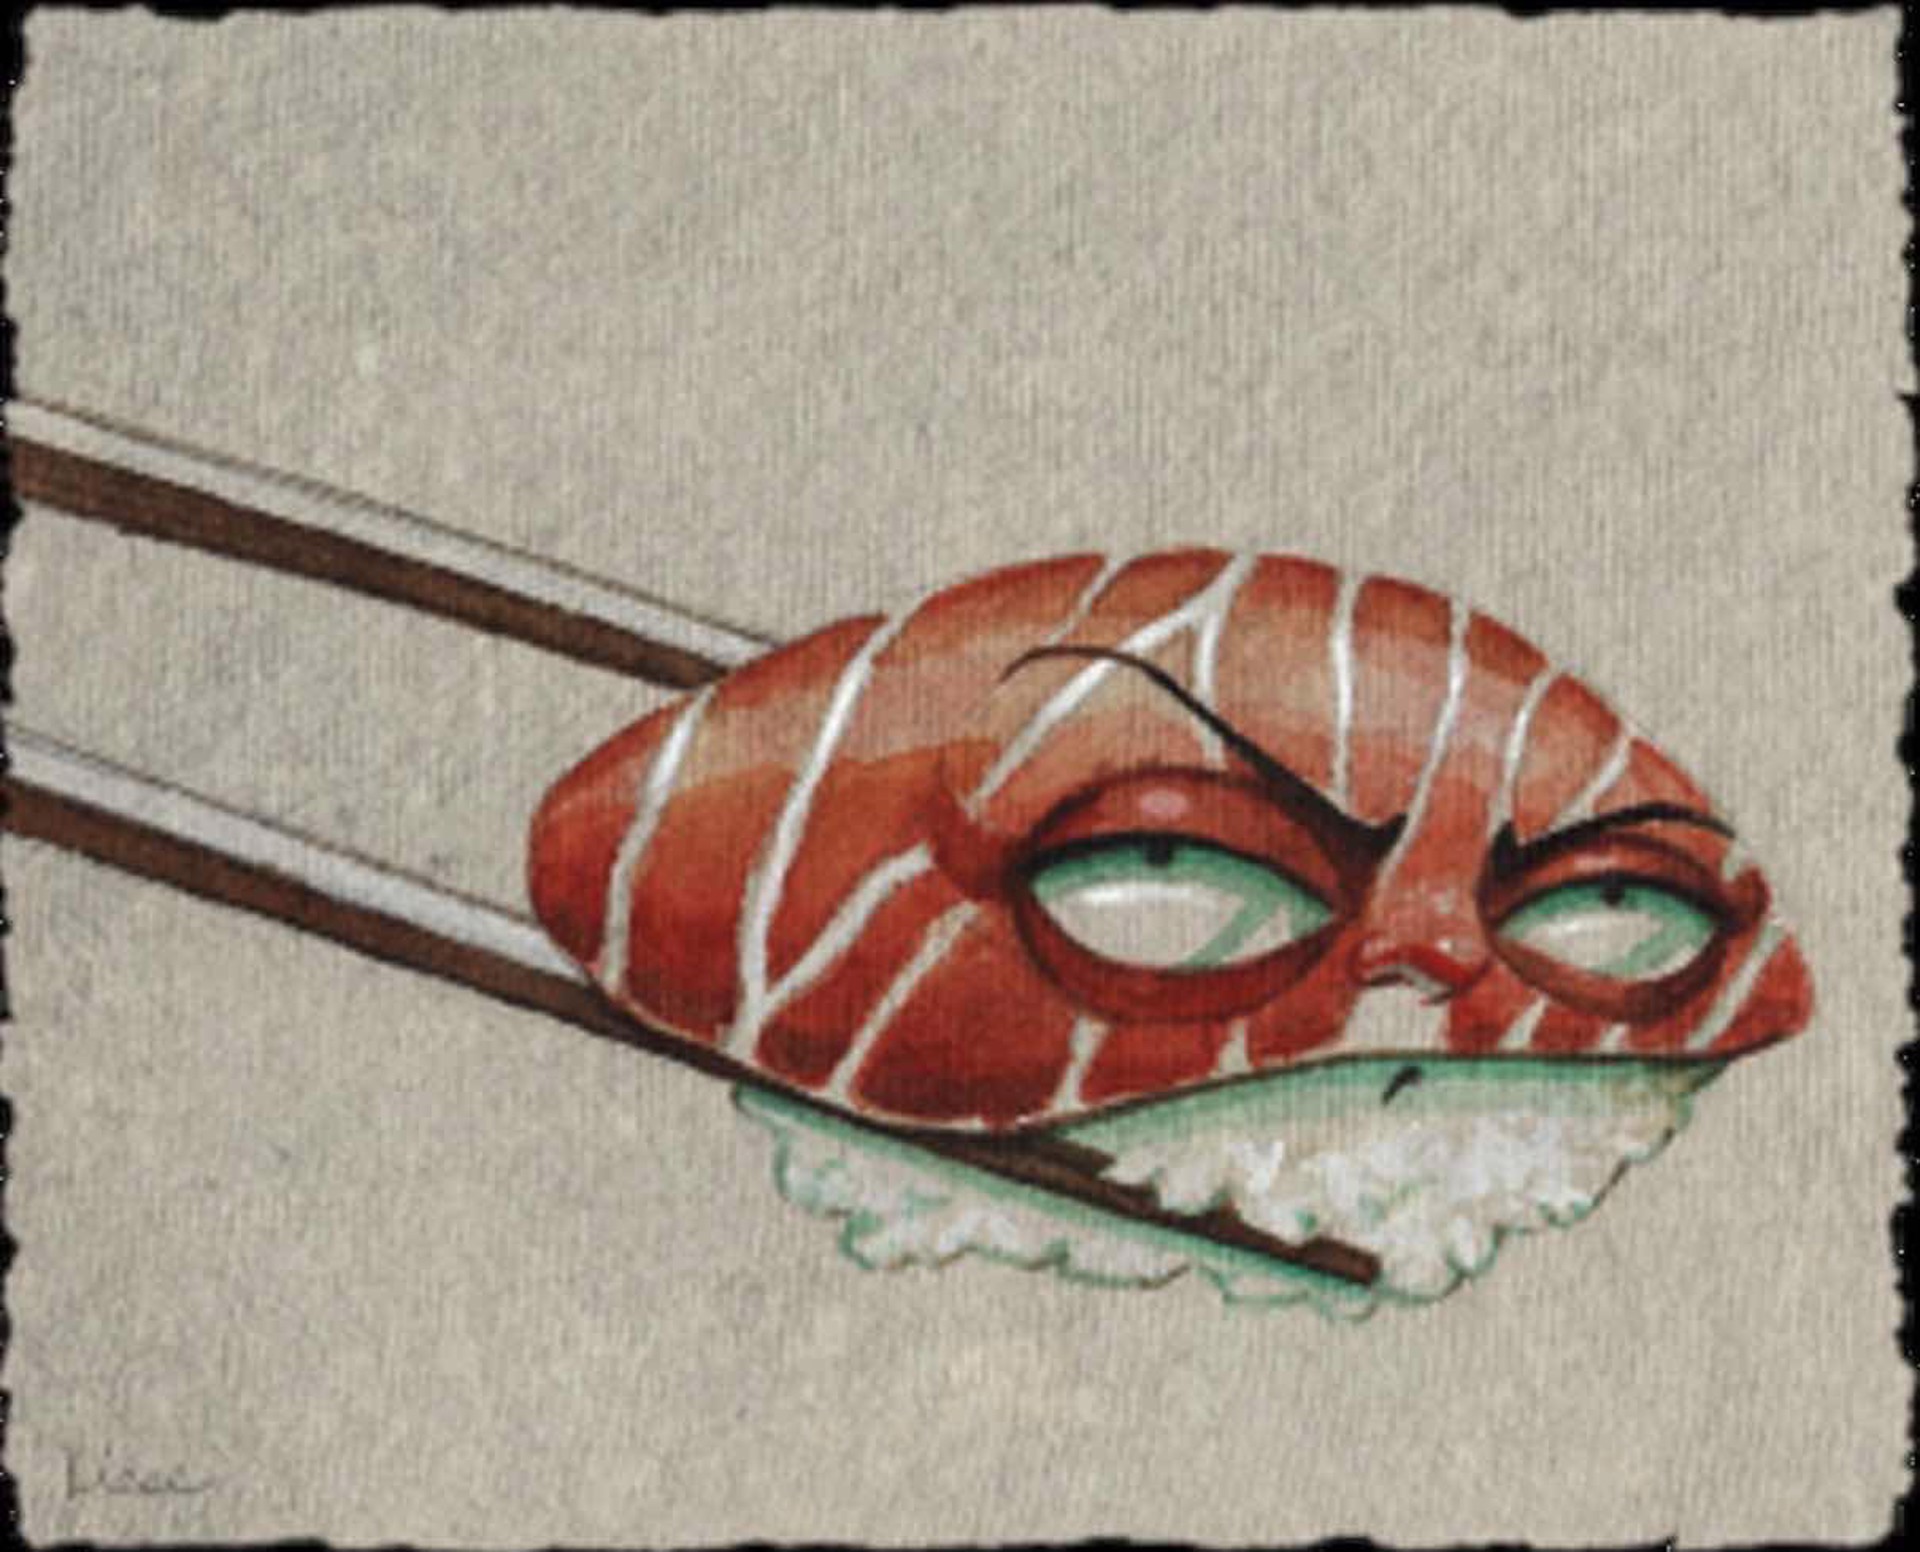 Sushi of Fury (Giclee on Deckled Paper) G.O. by Liese Chavez